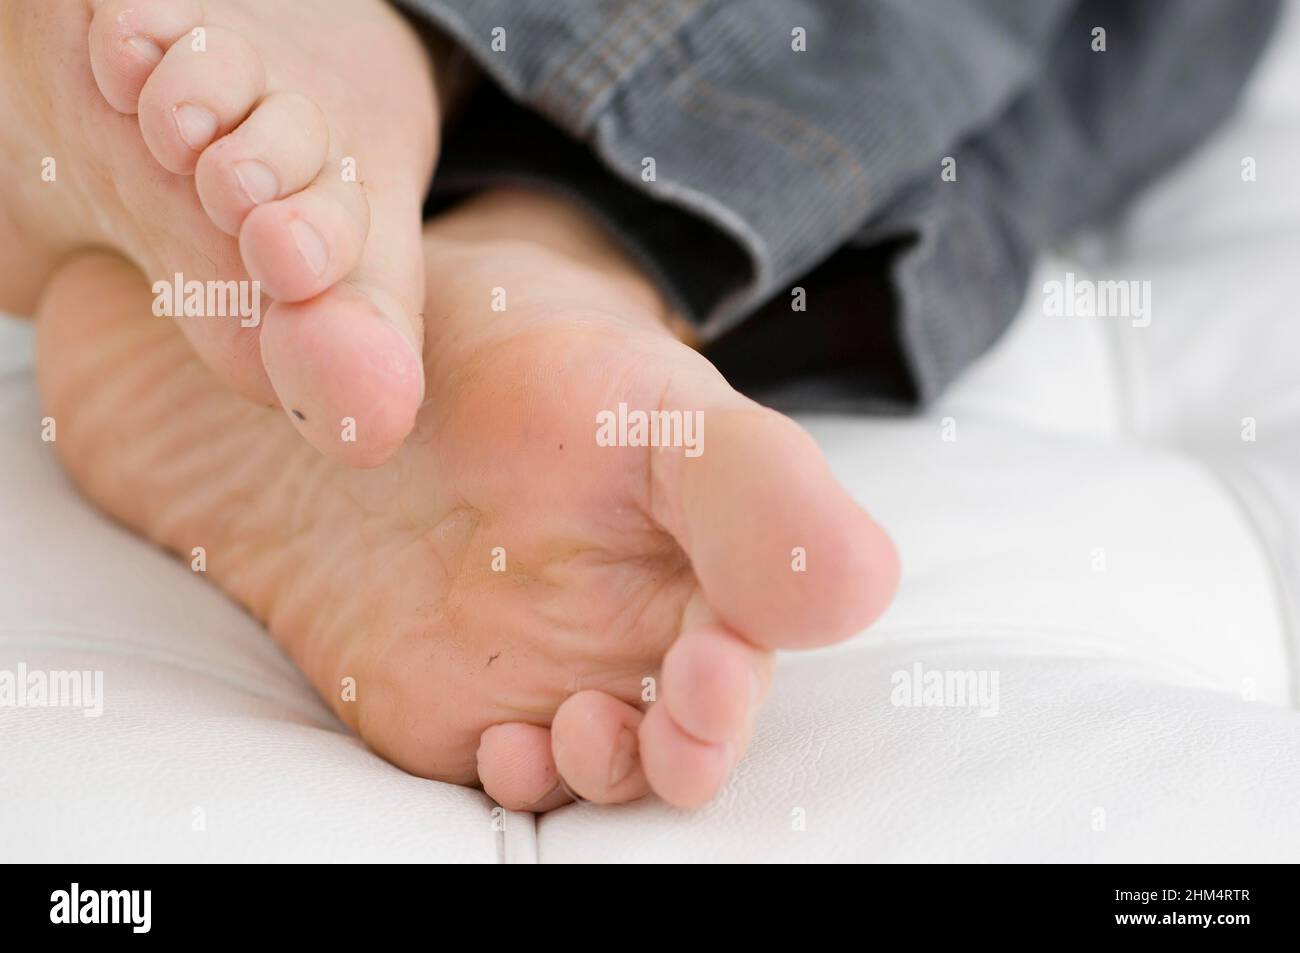 Low Section View Of A Person'S Dirty Feet On The Bed, Credit:Photoshot Creative / Stuart Cox / Avalon Stock Photo